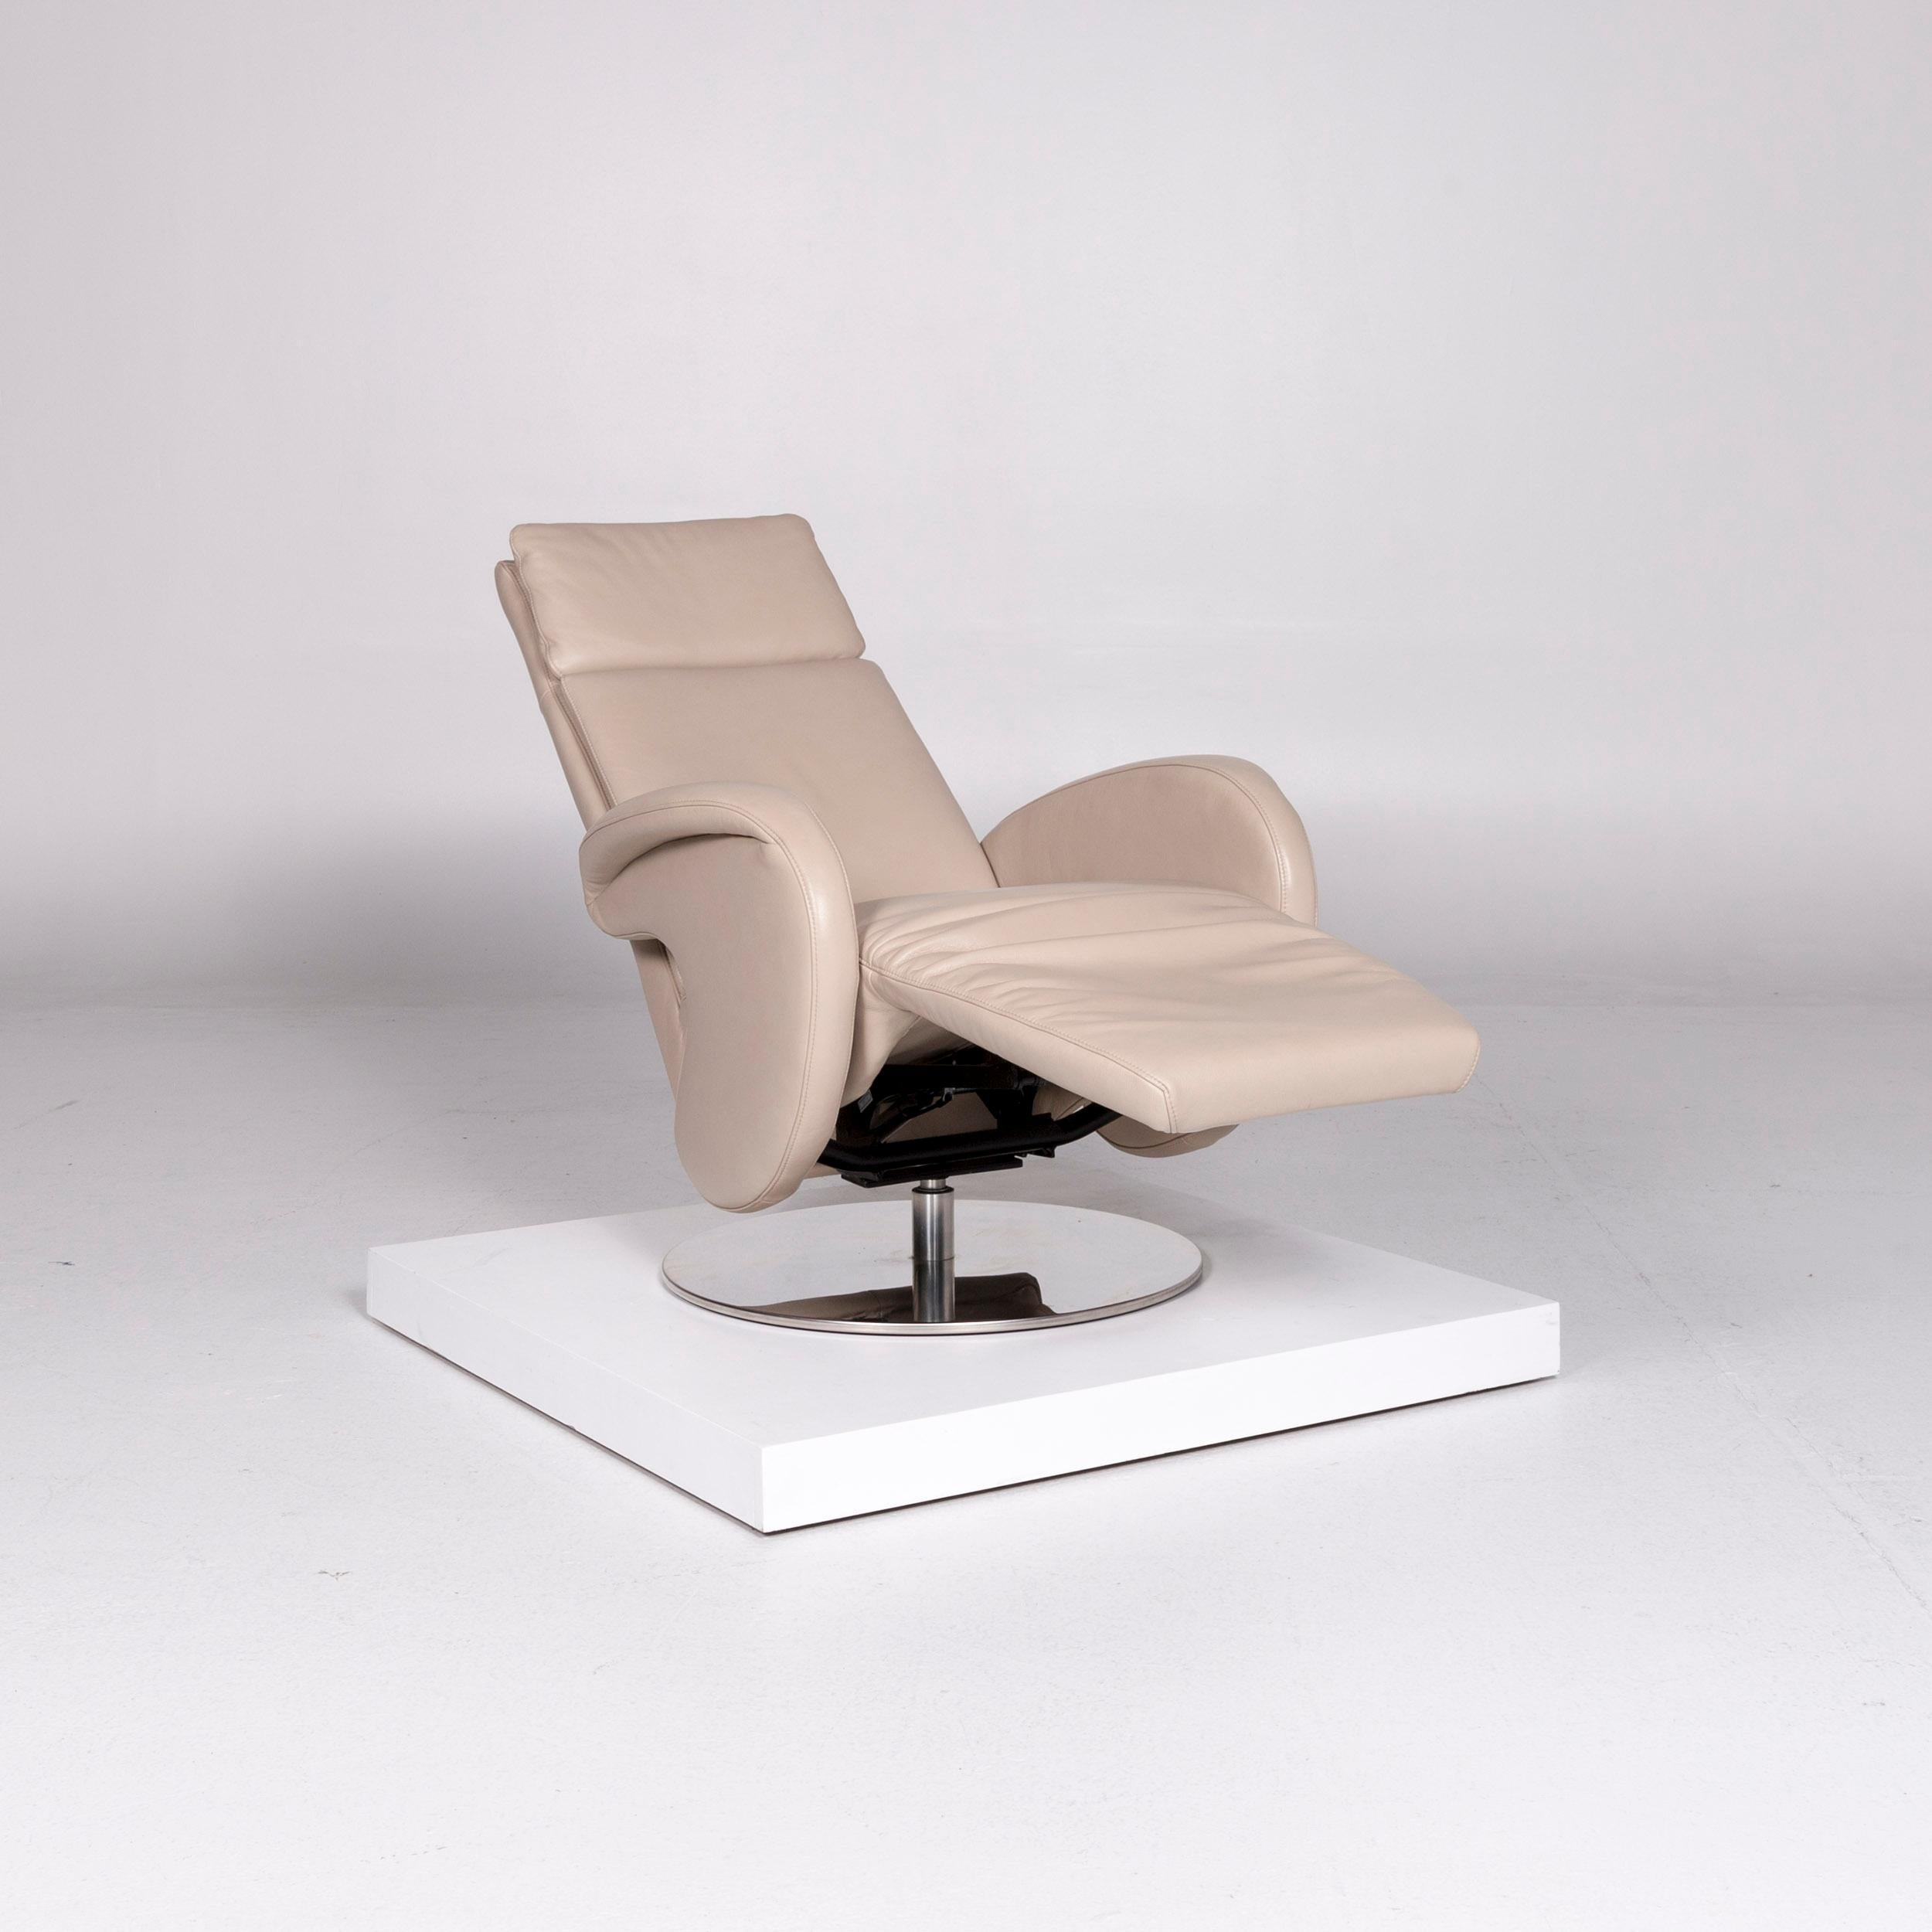 We bring to you a Willi Schillig leather armchair cream relax function.
  
 
 Product measurements in centimeters:
 
 Depth 92
Width 74
Height 107
Seat-height 45
Rest-height 59
Seat-depth 55
Seat-width 49
Back-height 67.